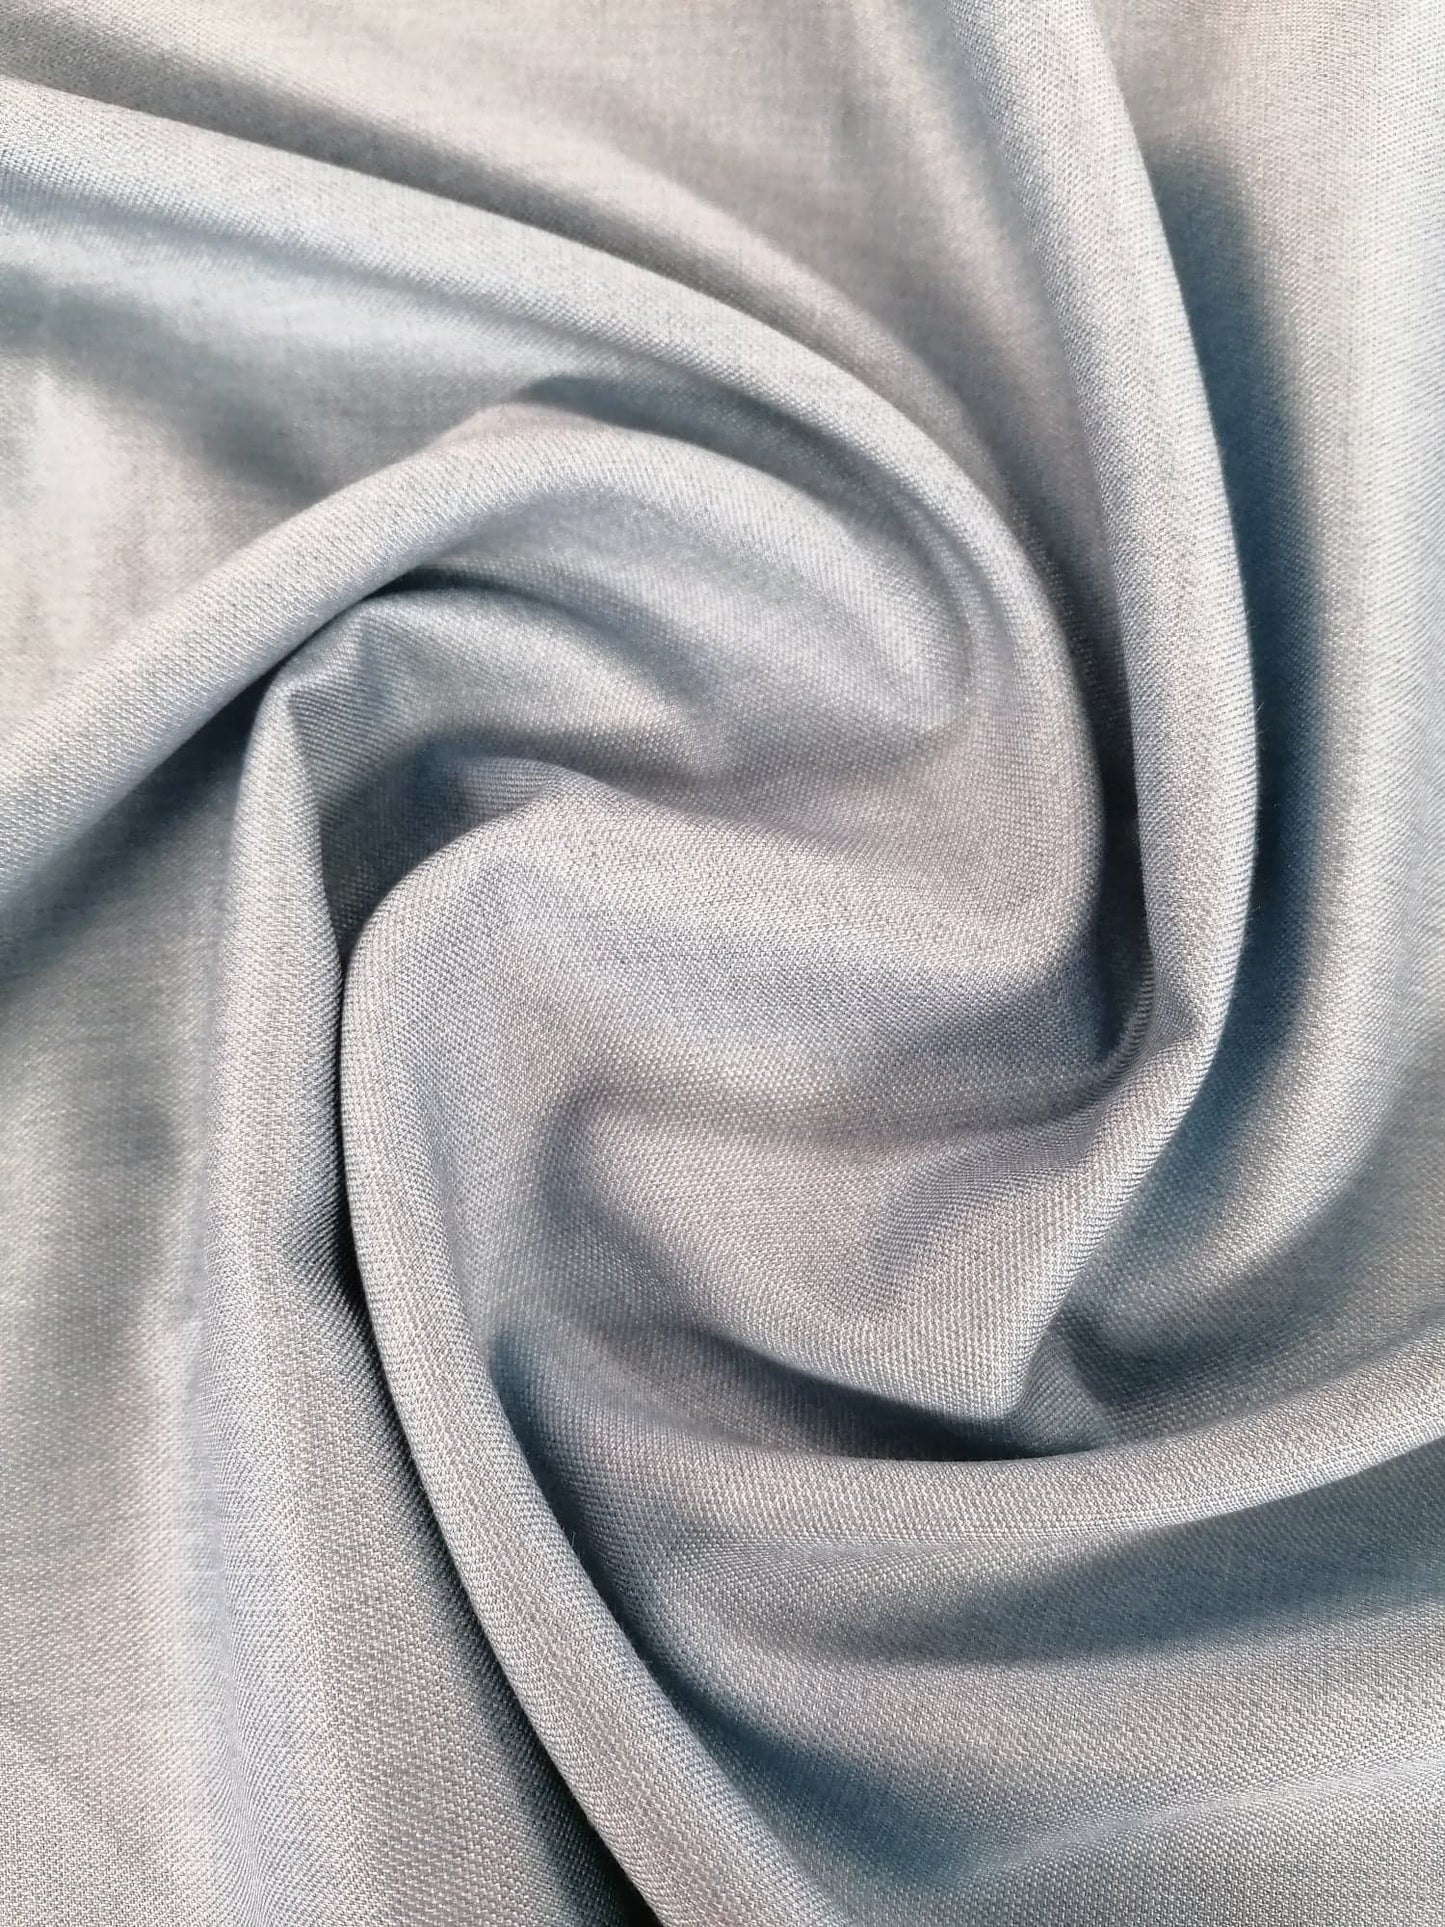 Superfine Wool and Cashmere Suiting - Light Blue - 58" Wide - Sold By the Metre